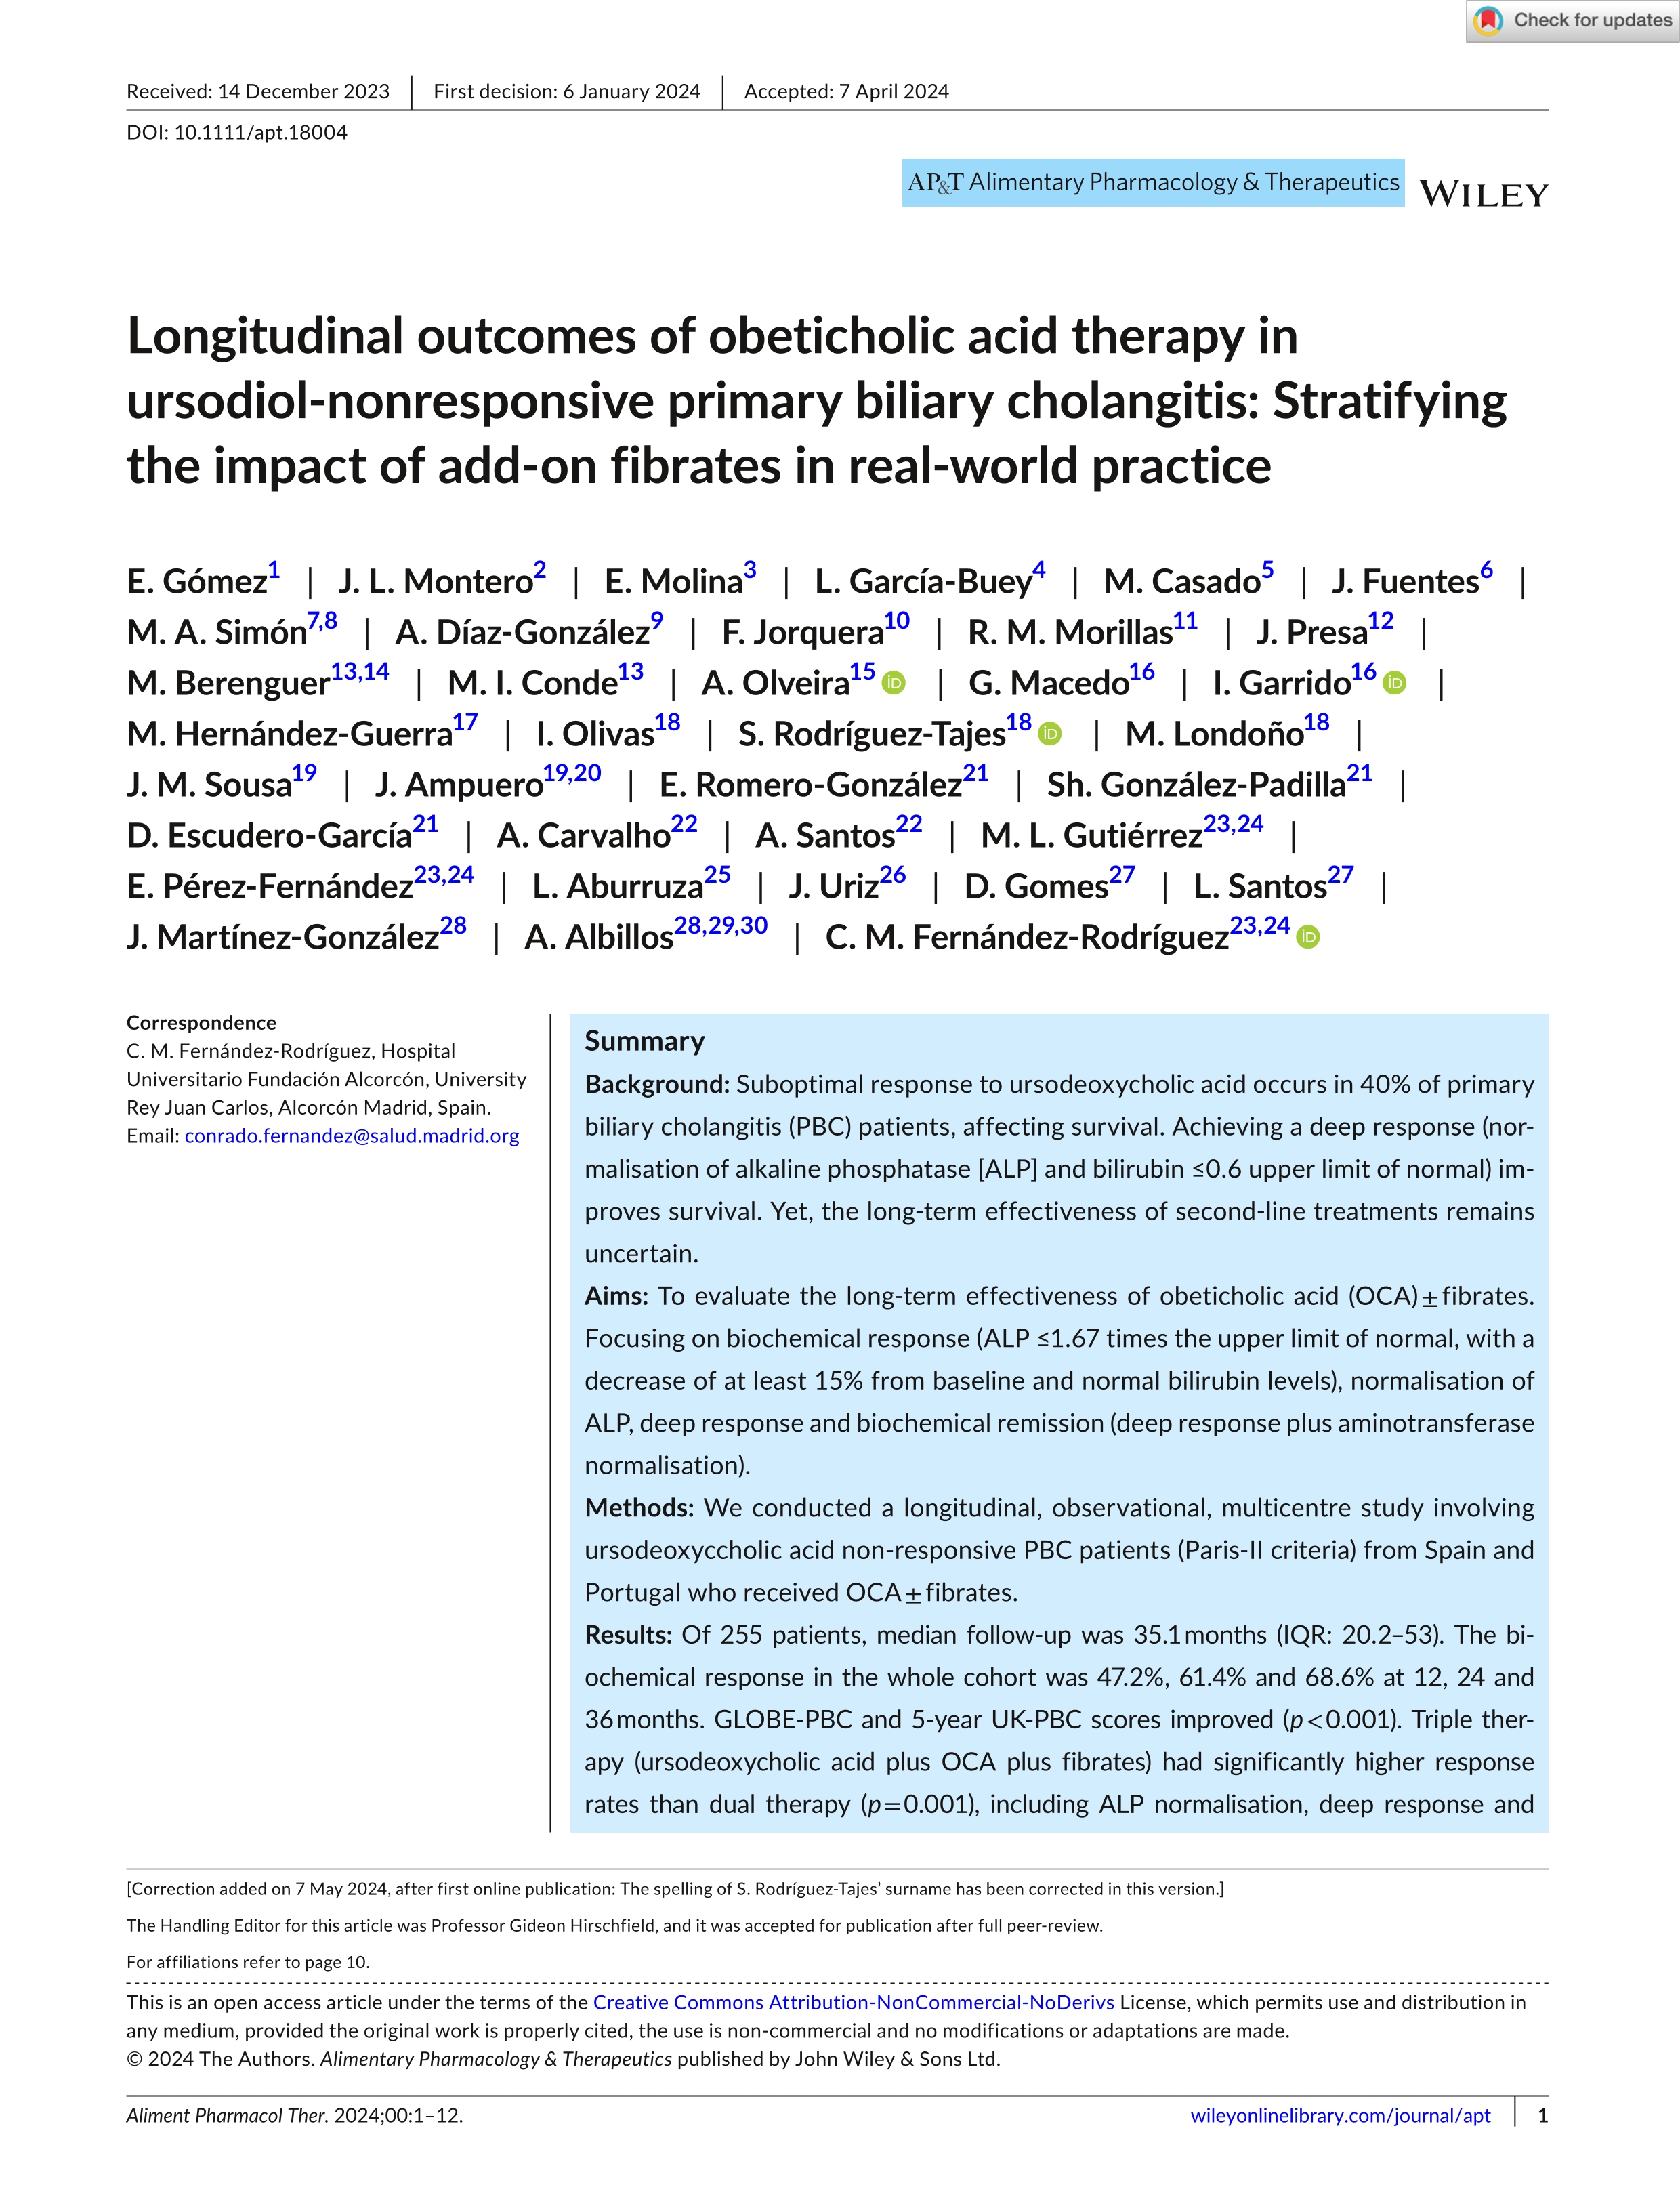 Longitudinal outcomes of obeticholic acid therapy in ursodiol-nonresponsive primary biliary cholangitis: Stratifying the impact of add-on fibrates in real-world practice